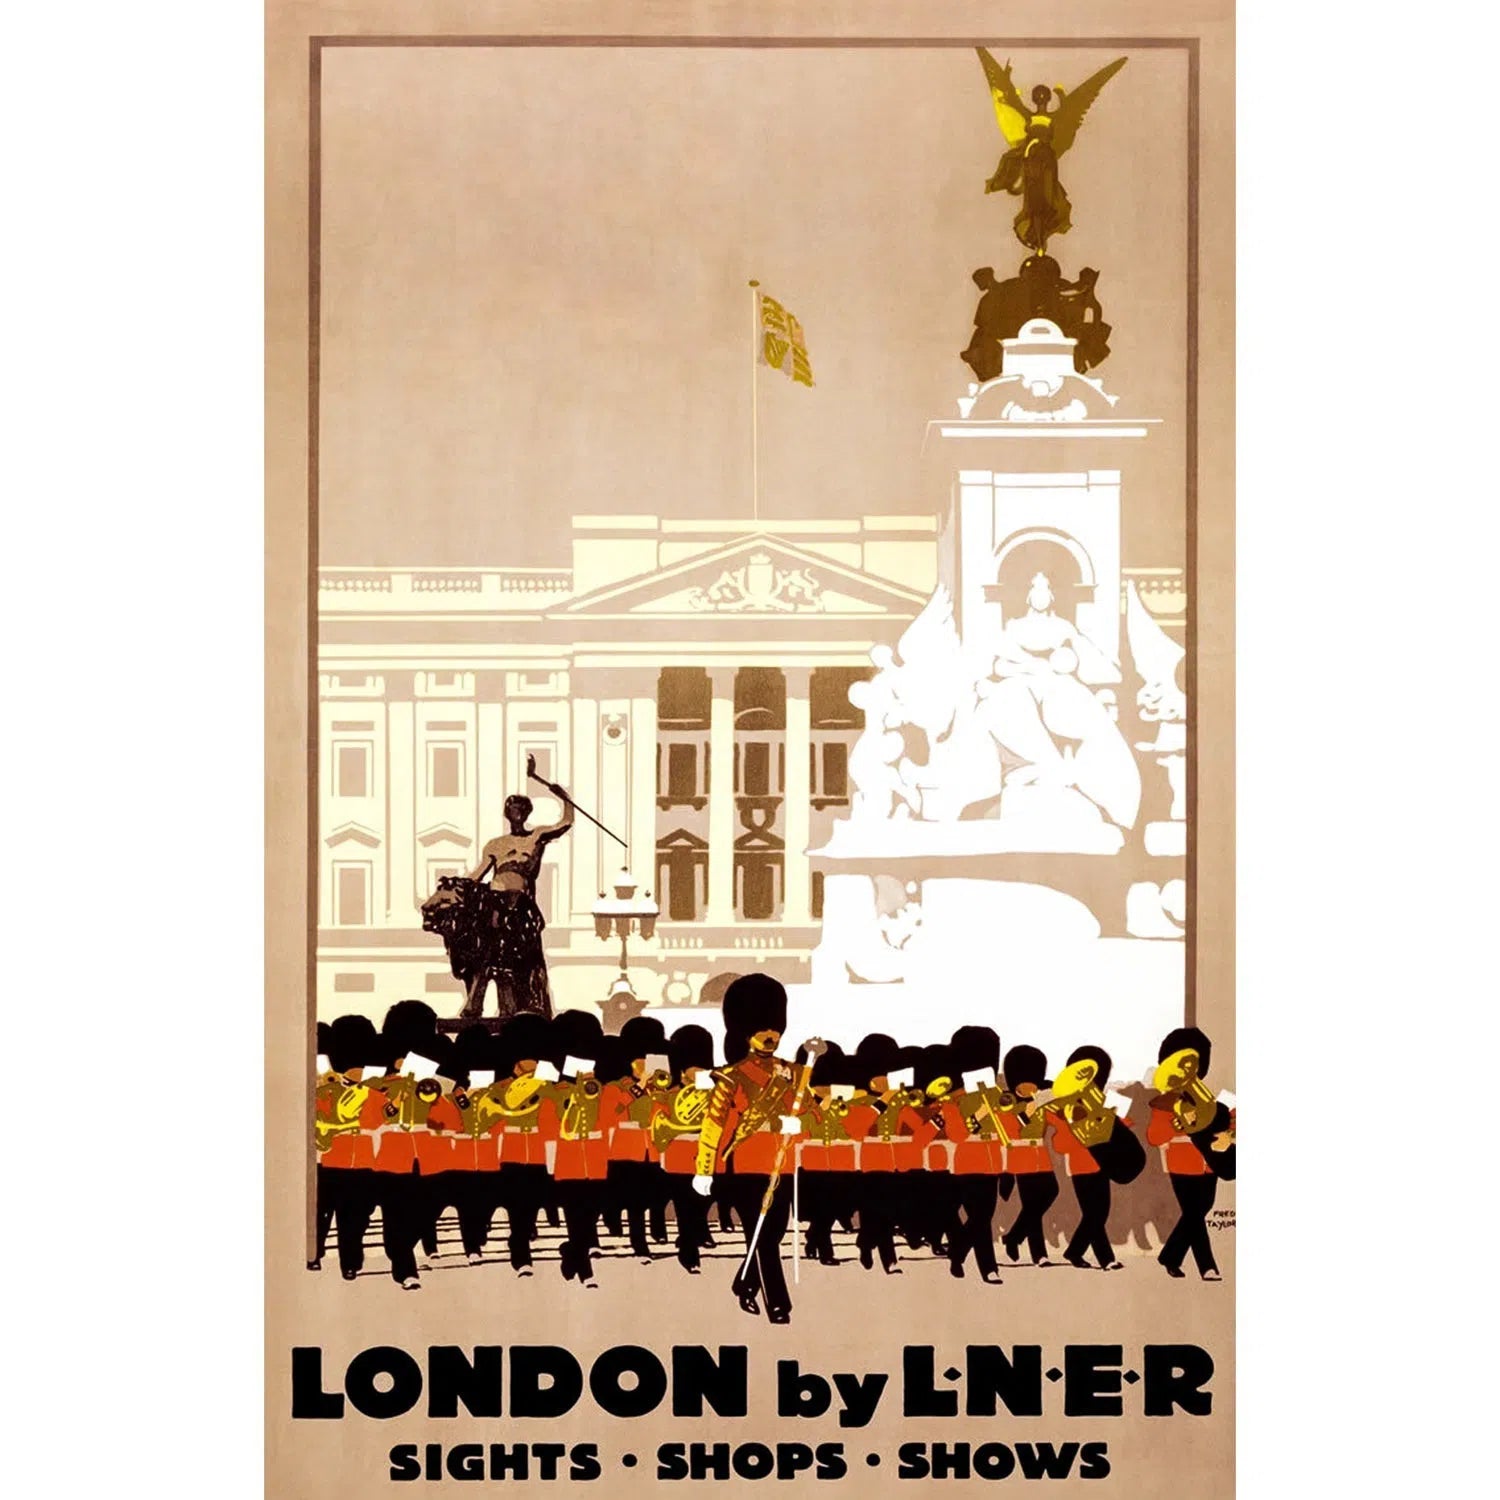 London by L.N.E.R-Imagesdartistes